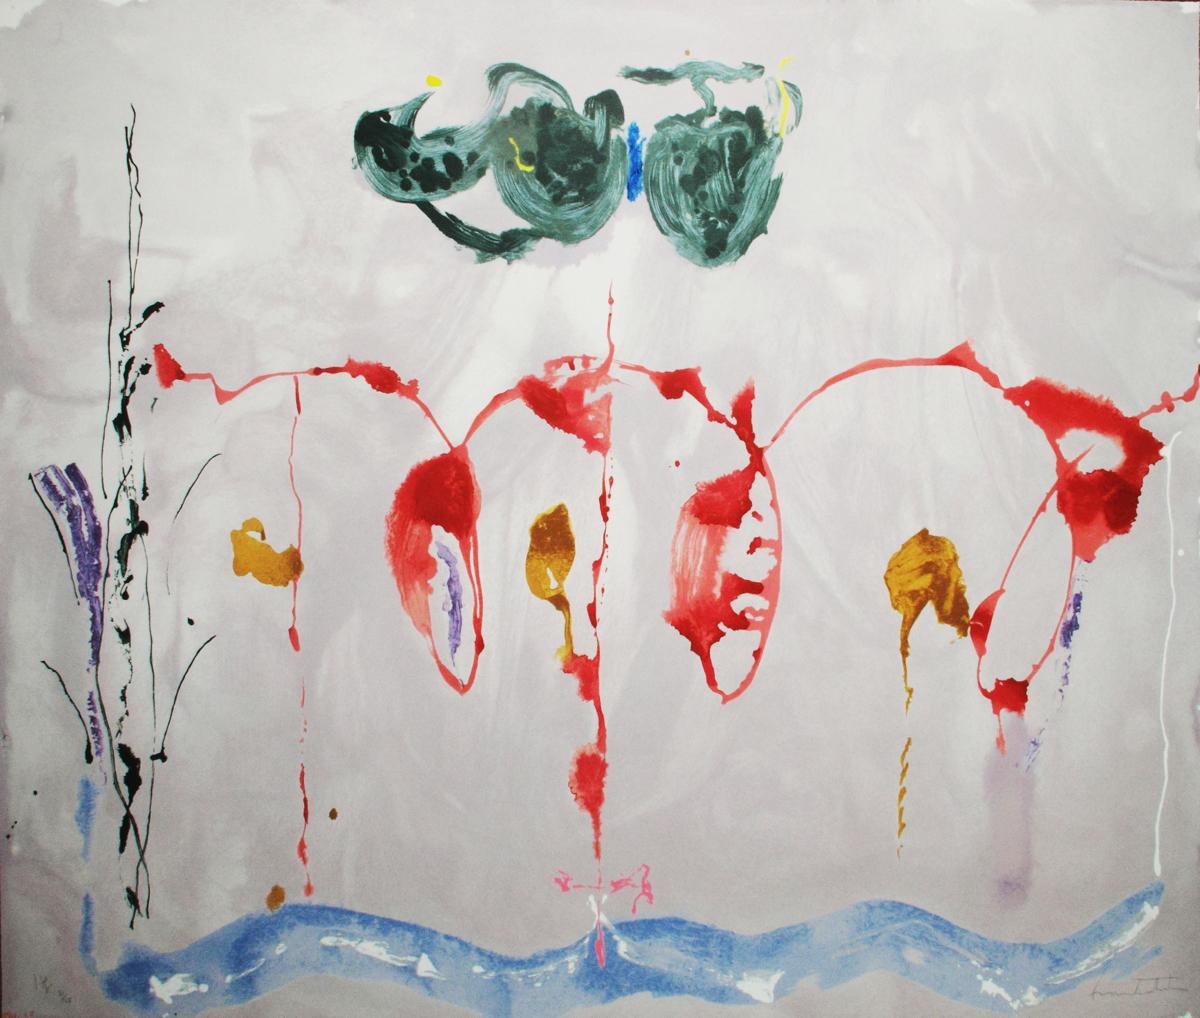 Titled "Aerie" and based on a painting of this title, the screen print wonderfully embodies the energetic and radiant color one so desires in Ms. Frankenthaler's paintings.  It is a remarkably complex, hand made image utilizing more than 90 screens